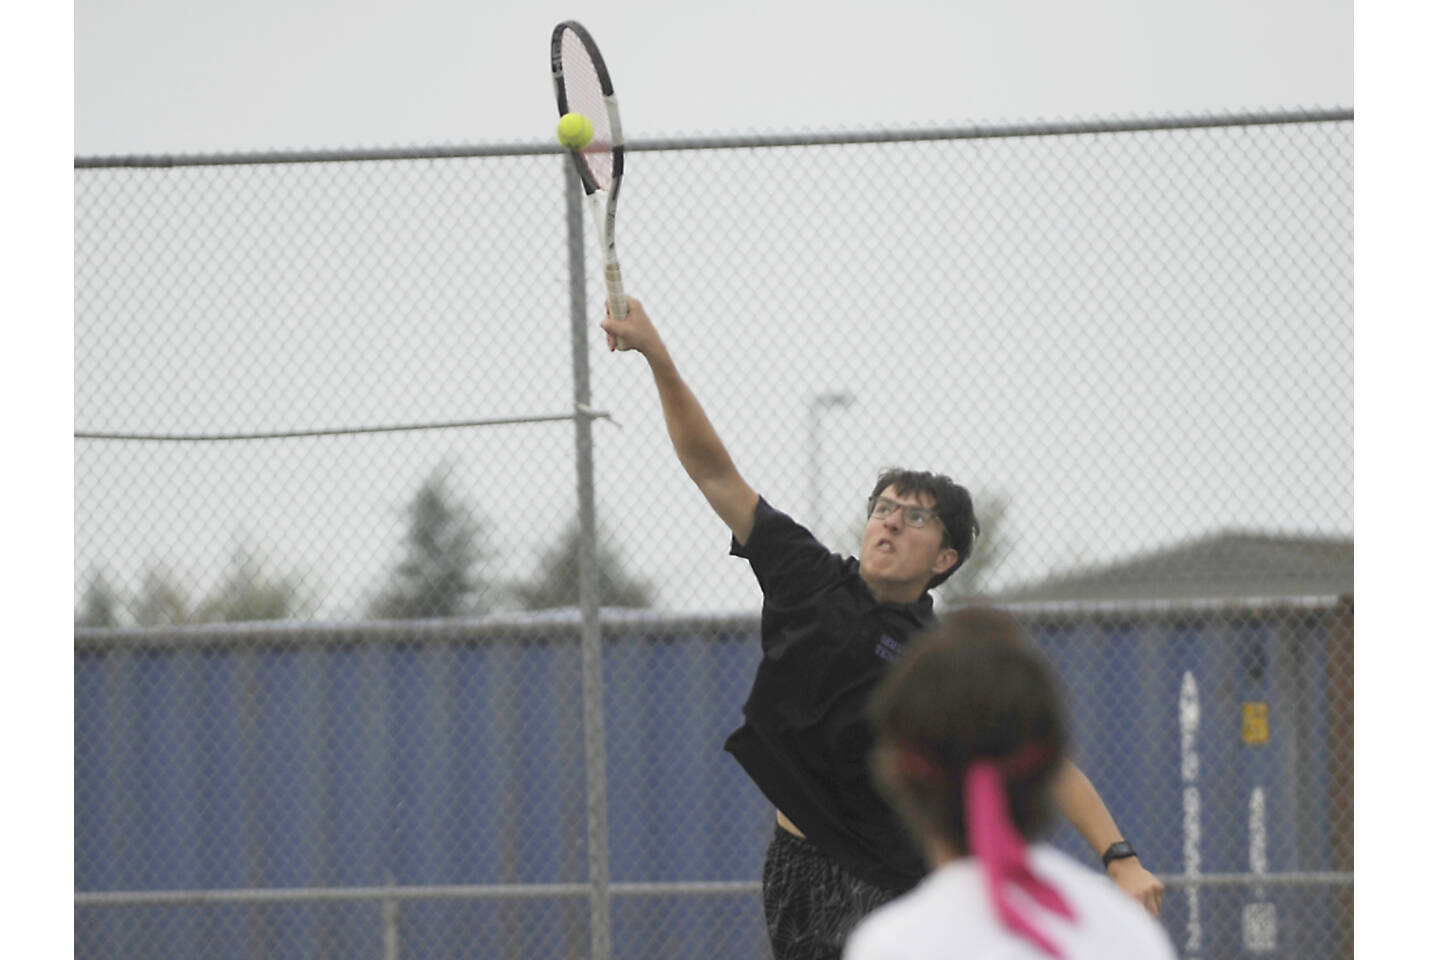 Sequim’s William Hughes returns a shot in tennis action in Sequim against Olympic on Tuesday. (Michael Dashiell/Olympic Peninsula News Group)